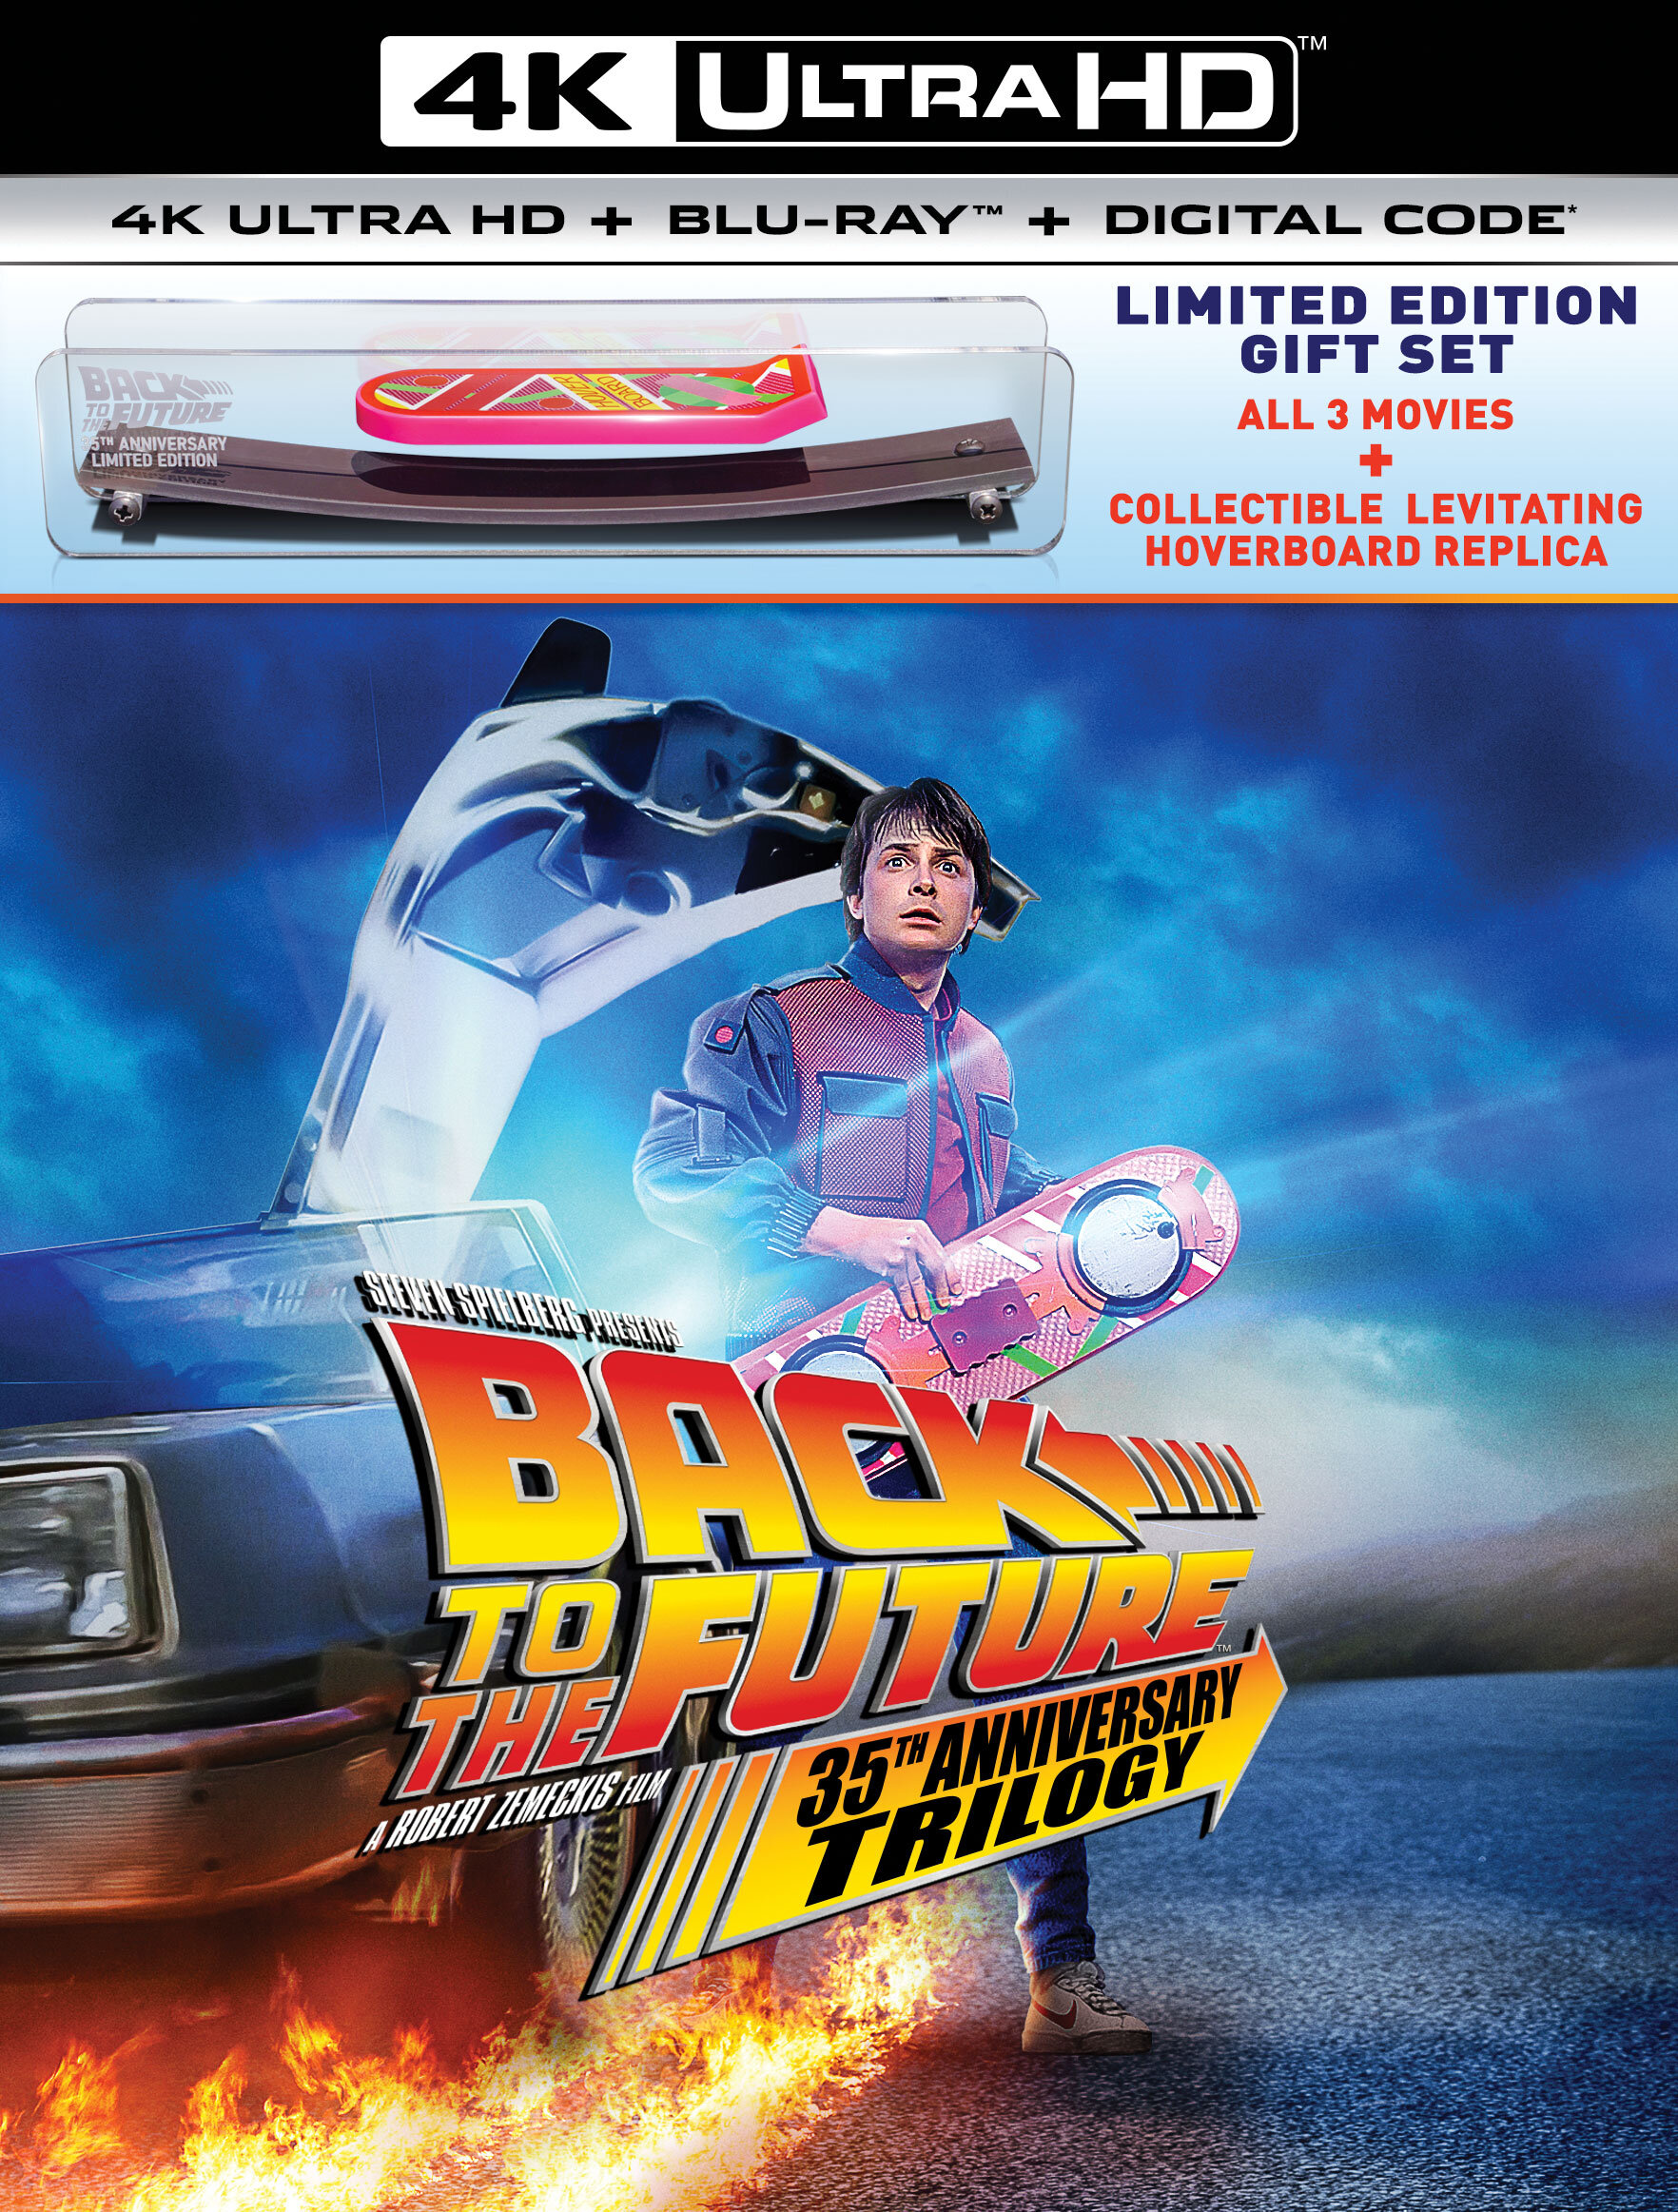 Back to the Future™ Trilogy — One of the Biggest Motion Picture